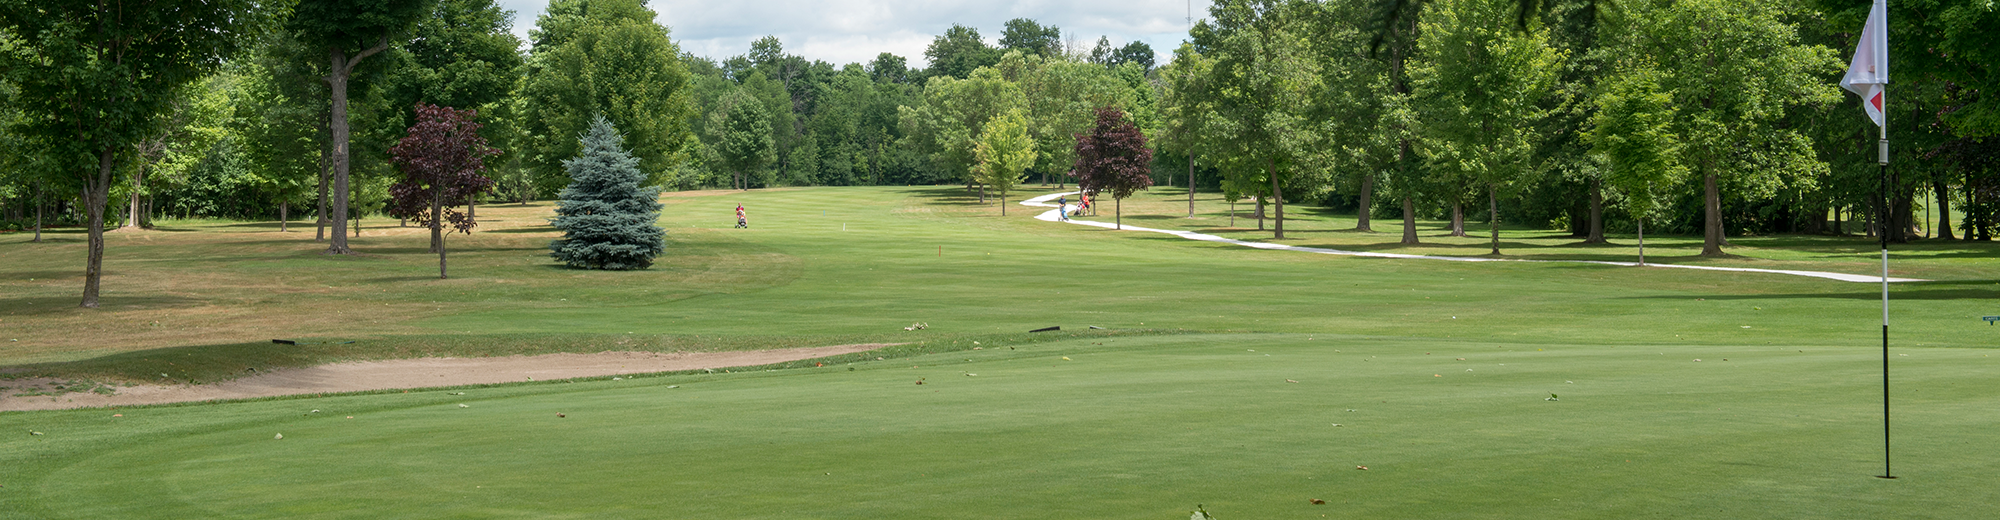 Course review: Rideau View Country Club